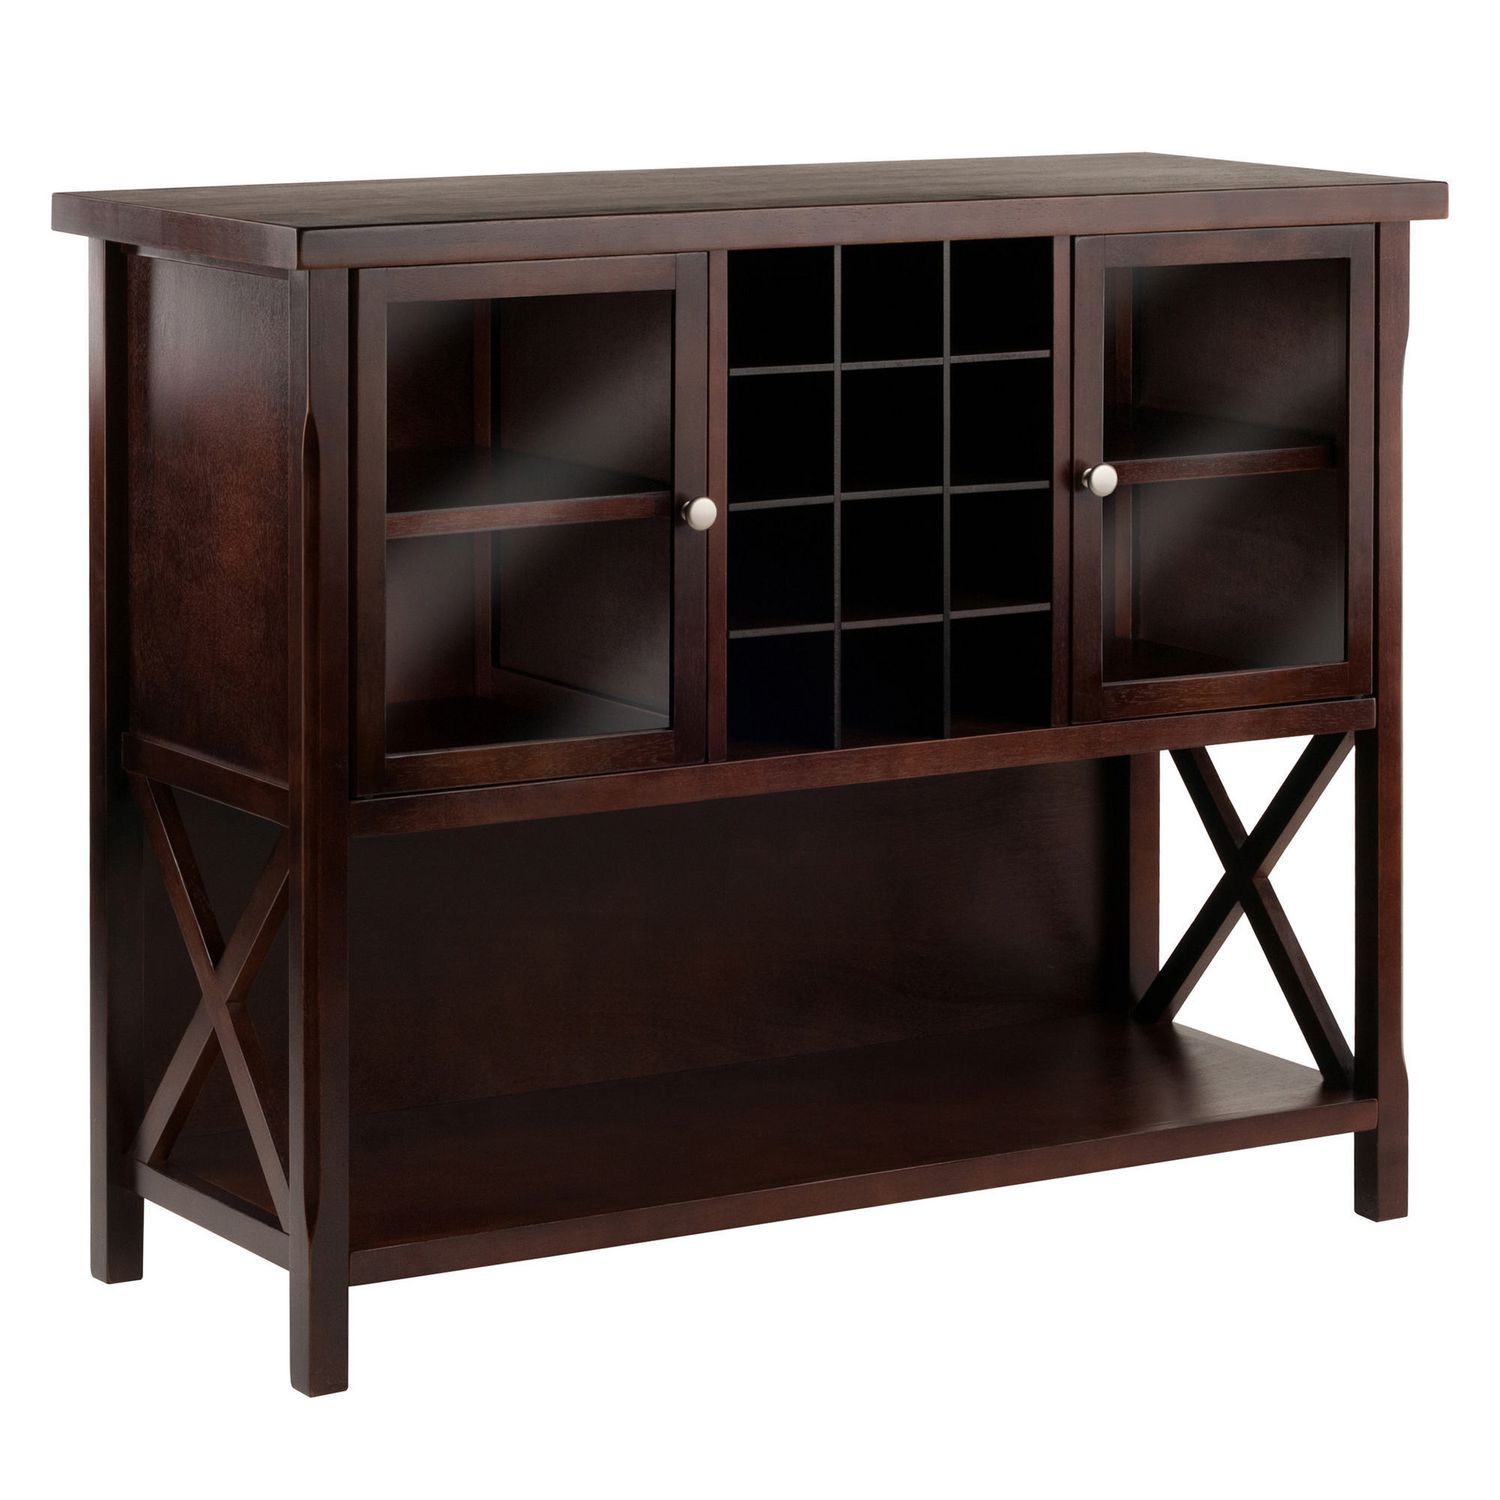 Winsome Xola Buffet Cabinet Intended For Wooden Buffets With Two Side Door Storage Cabinets And Stemware Rack (Photo 26 of 30)